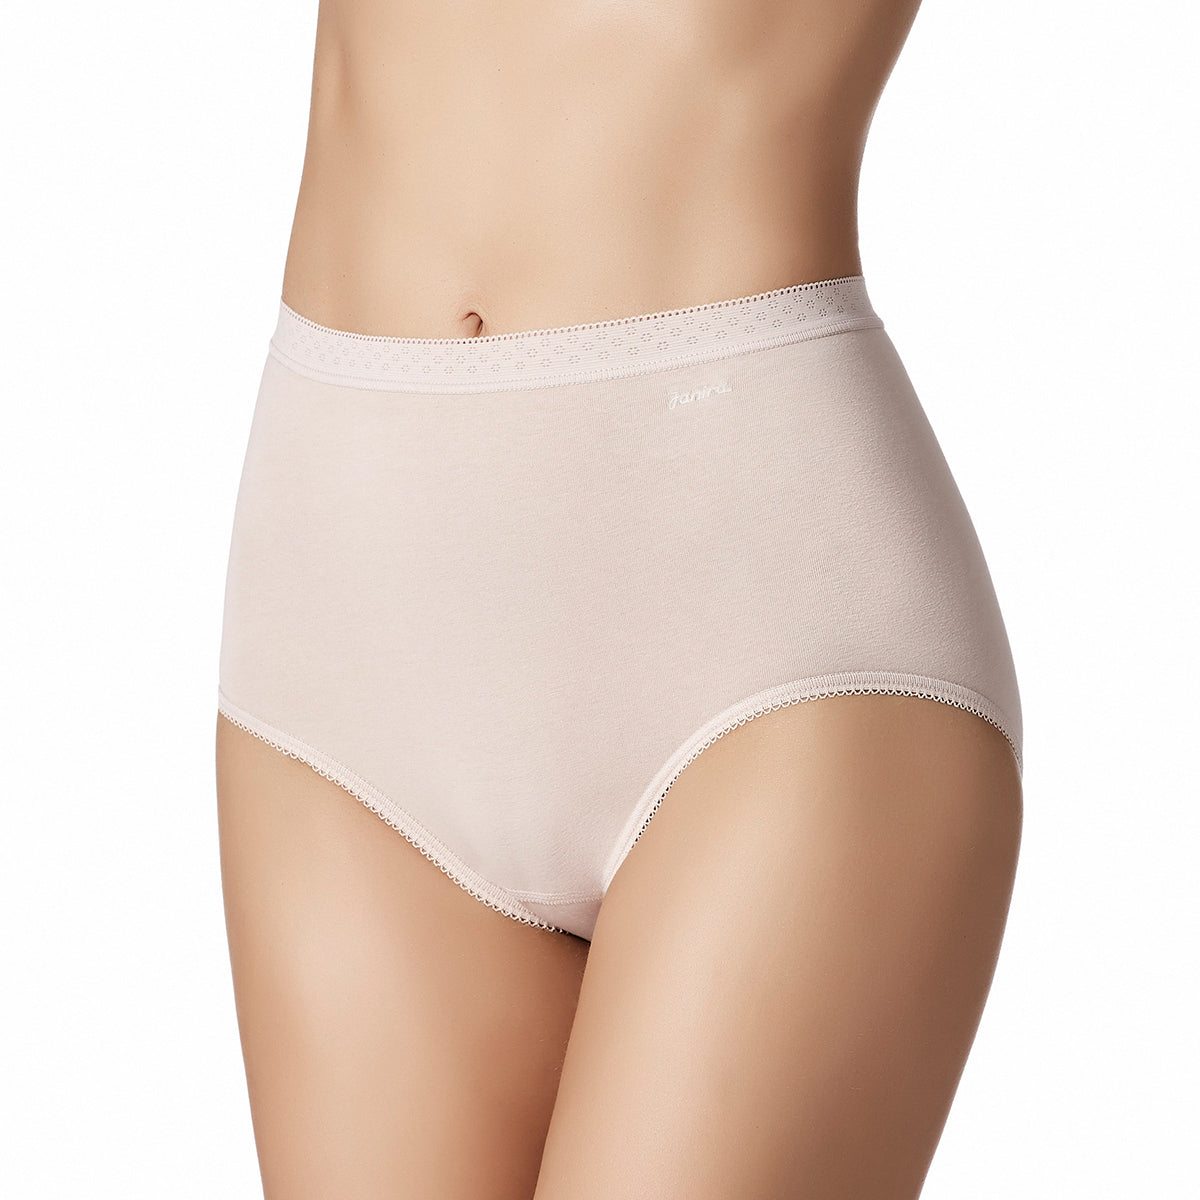 THE BEST FITTING PANTY IN THE WORLD! Trademark of SaraMax Apparel Group,  Inc. - Registration Number 4008315 - Serial Number 85049135 :: Justia  Trademarks